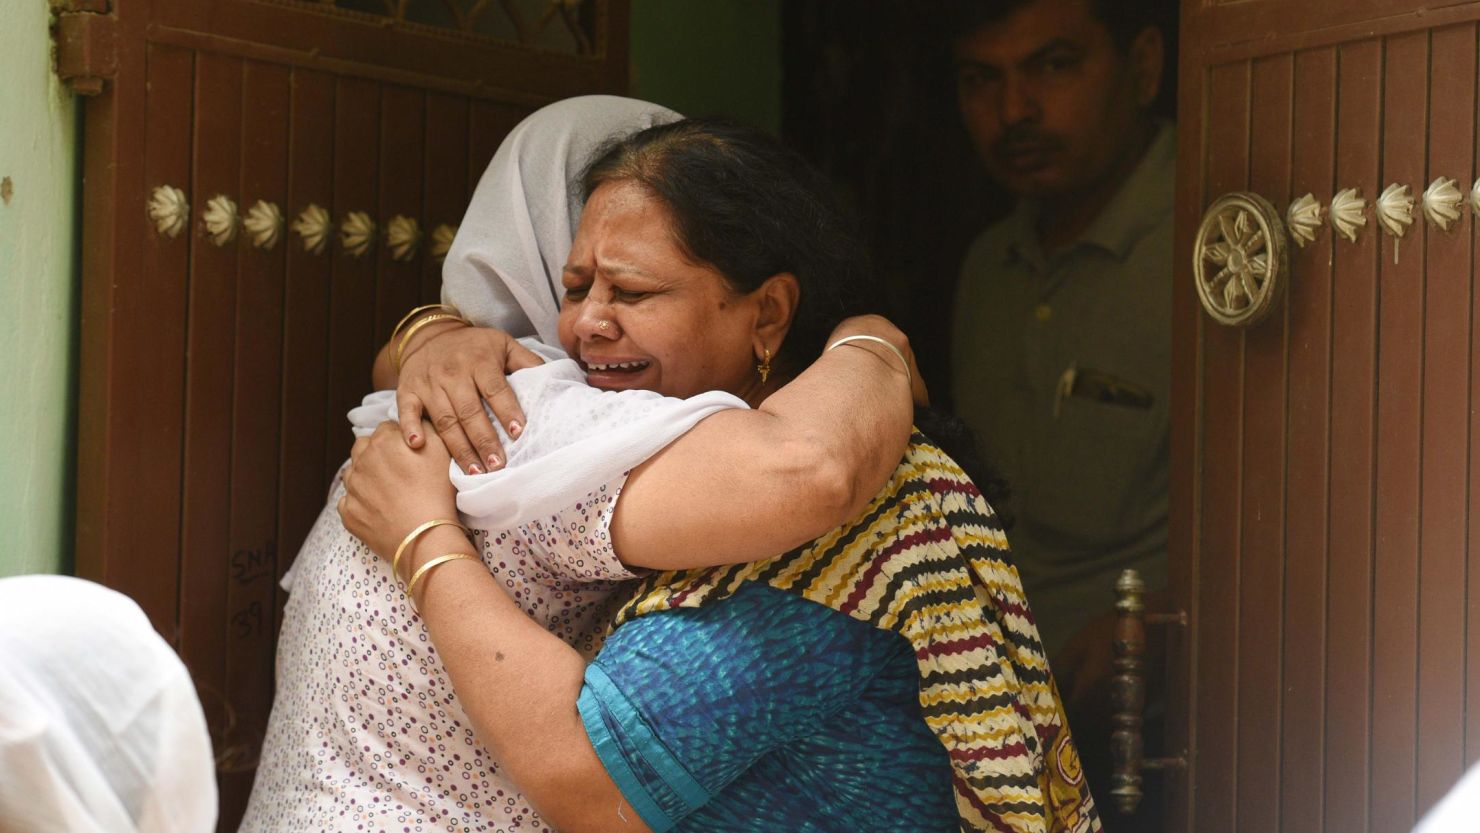 Relatives mourn outside the house, where 11 members of a family were found dead inside their home in the Indian capital of Delhi, on July 1, 2018.